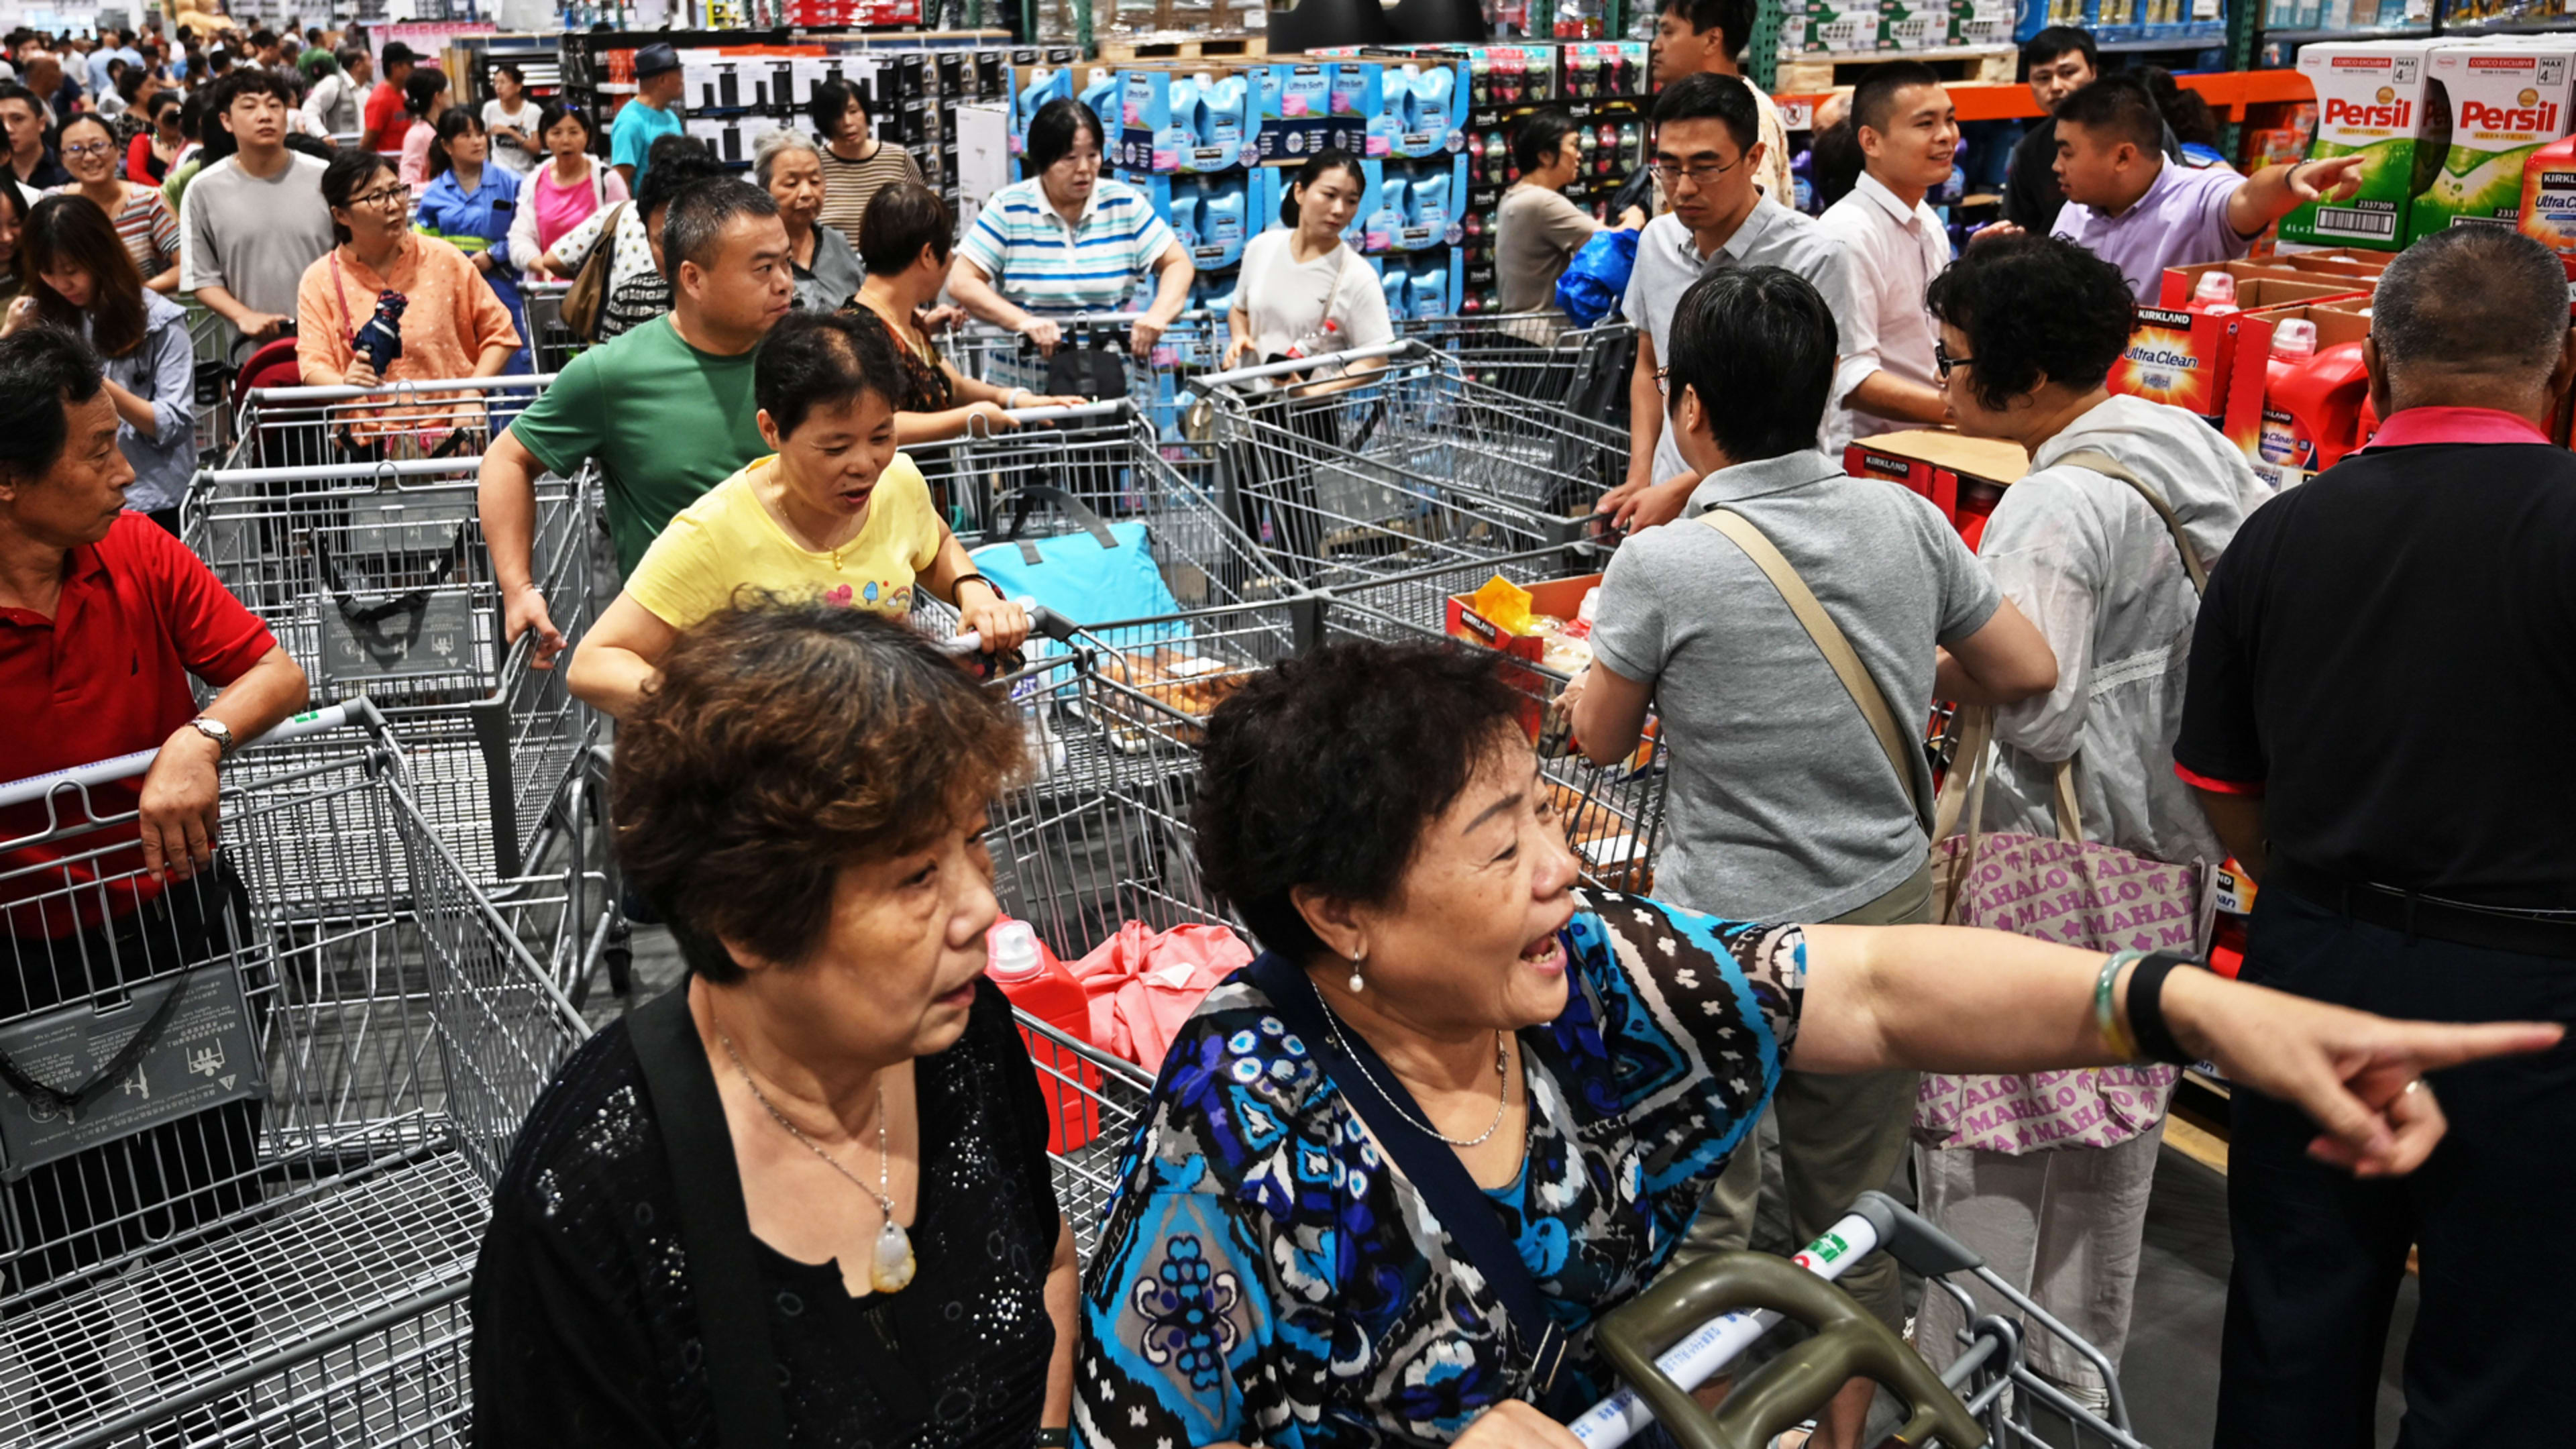 Costco opened its first store in China, and everyone came